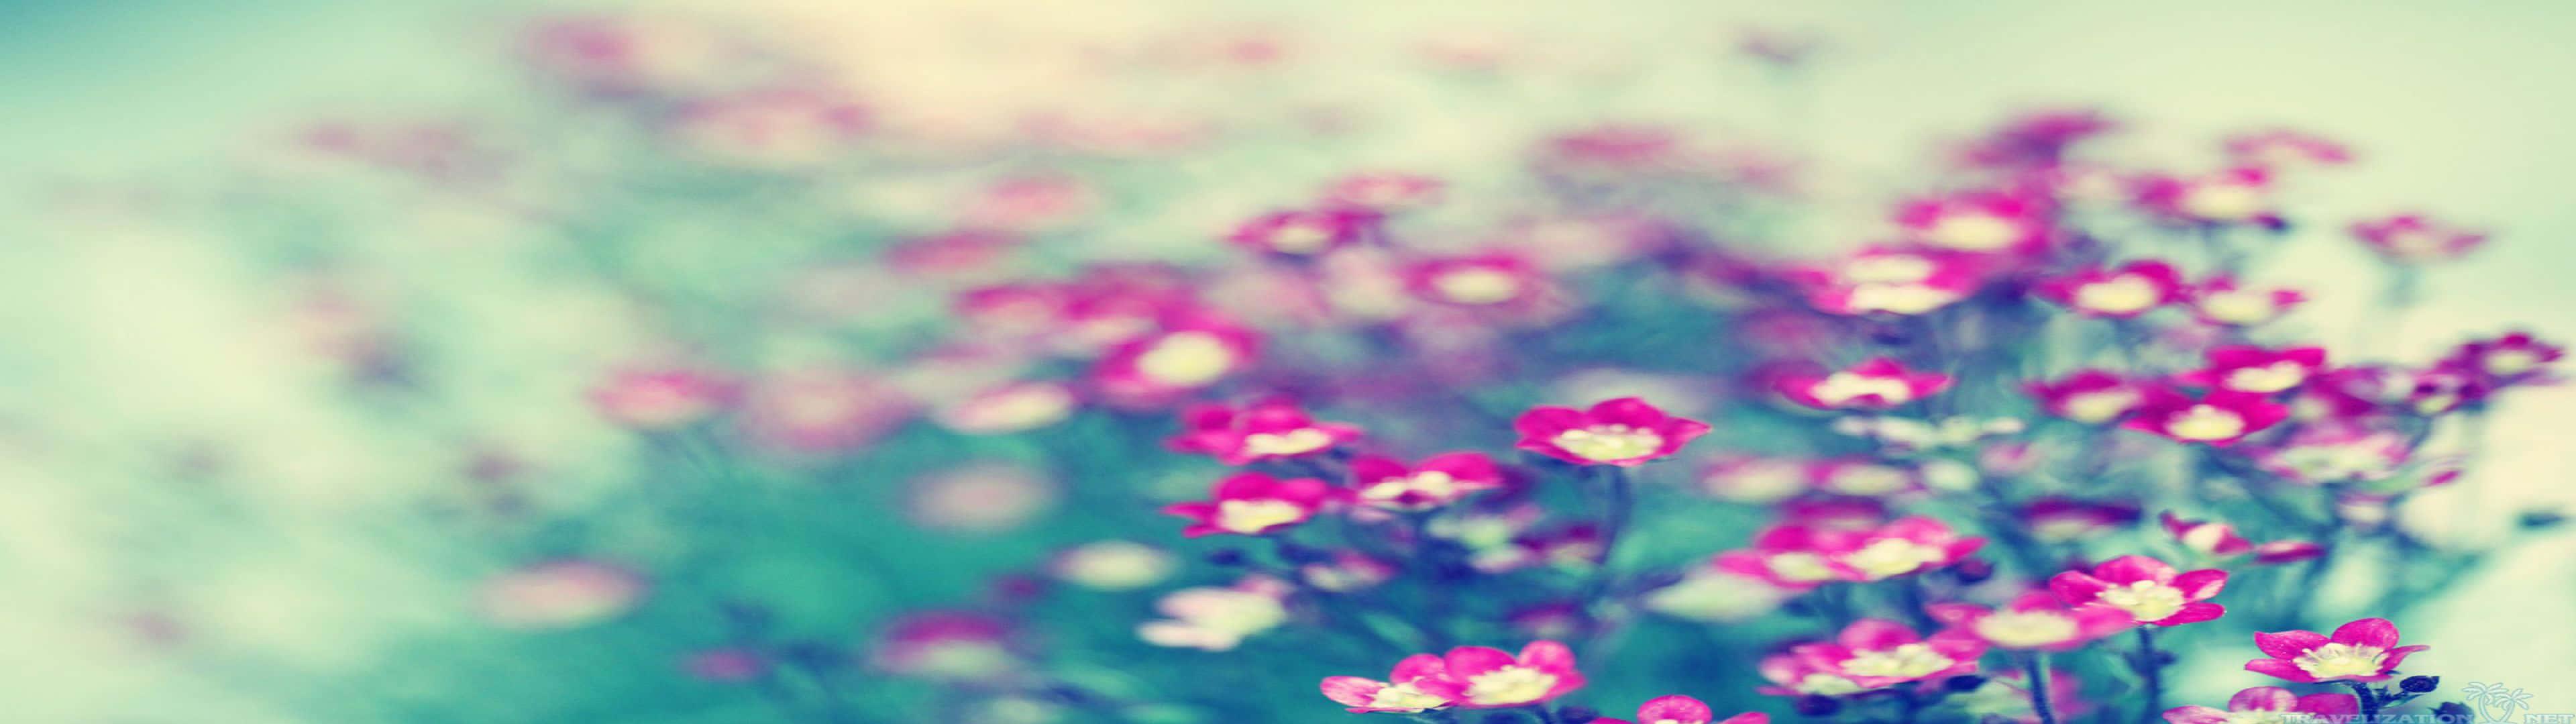 Pink Flowers In A Blurry Background Wallpaper